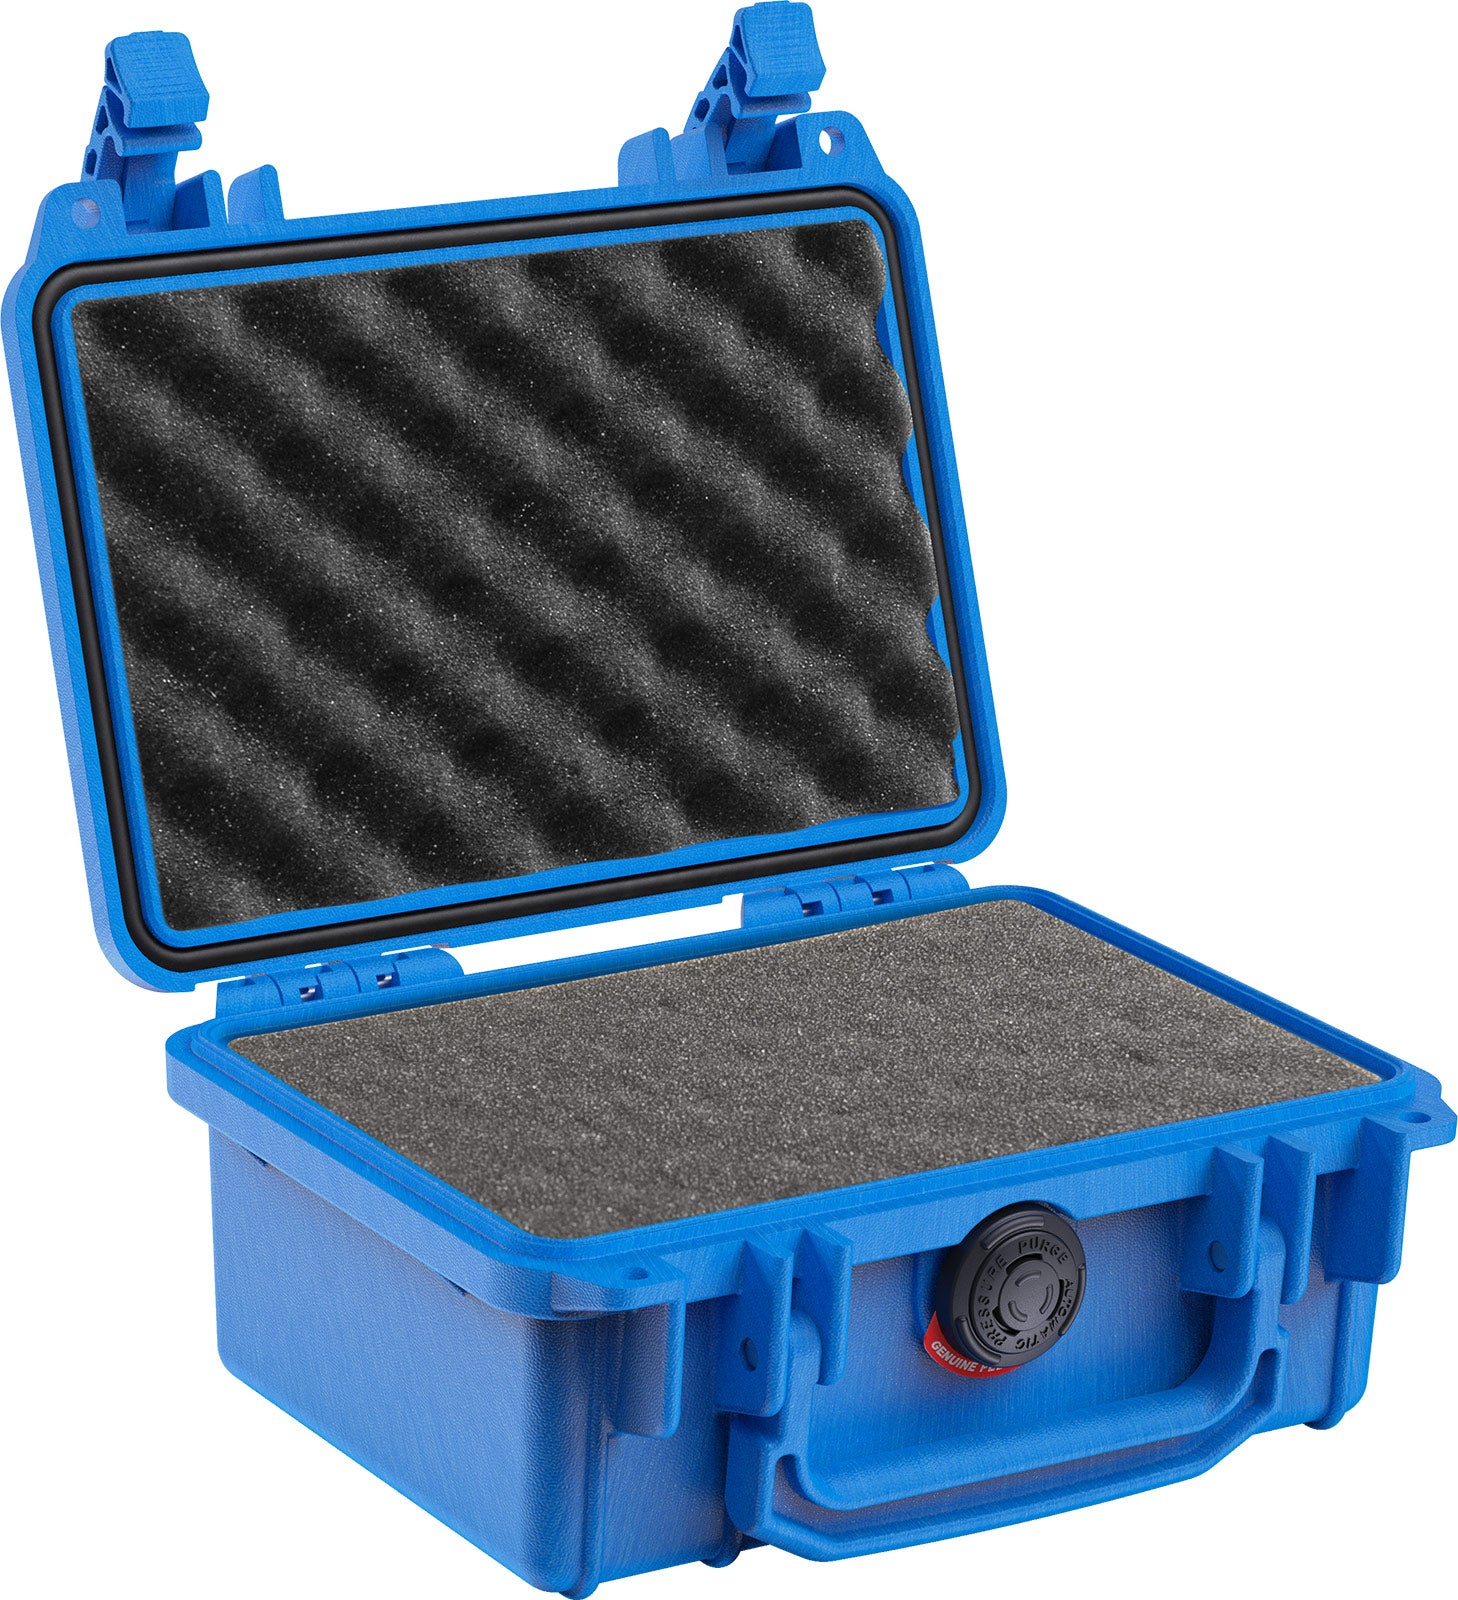 A waterproof Pelican 1120 case on a white background.